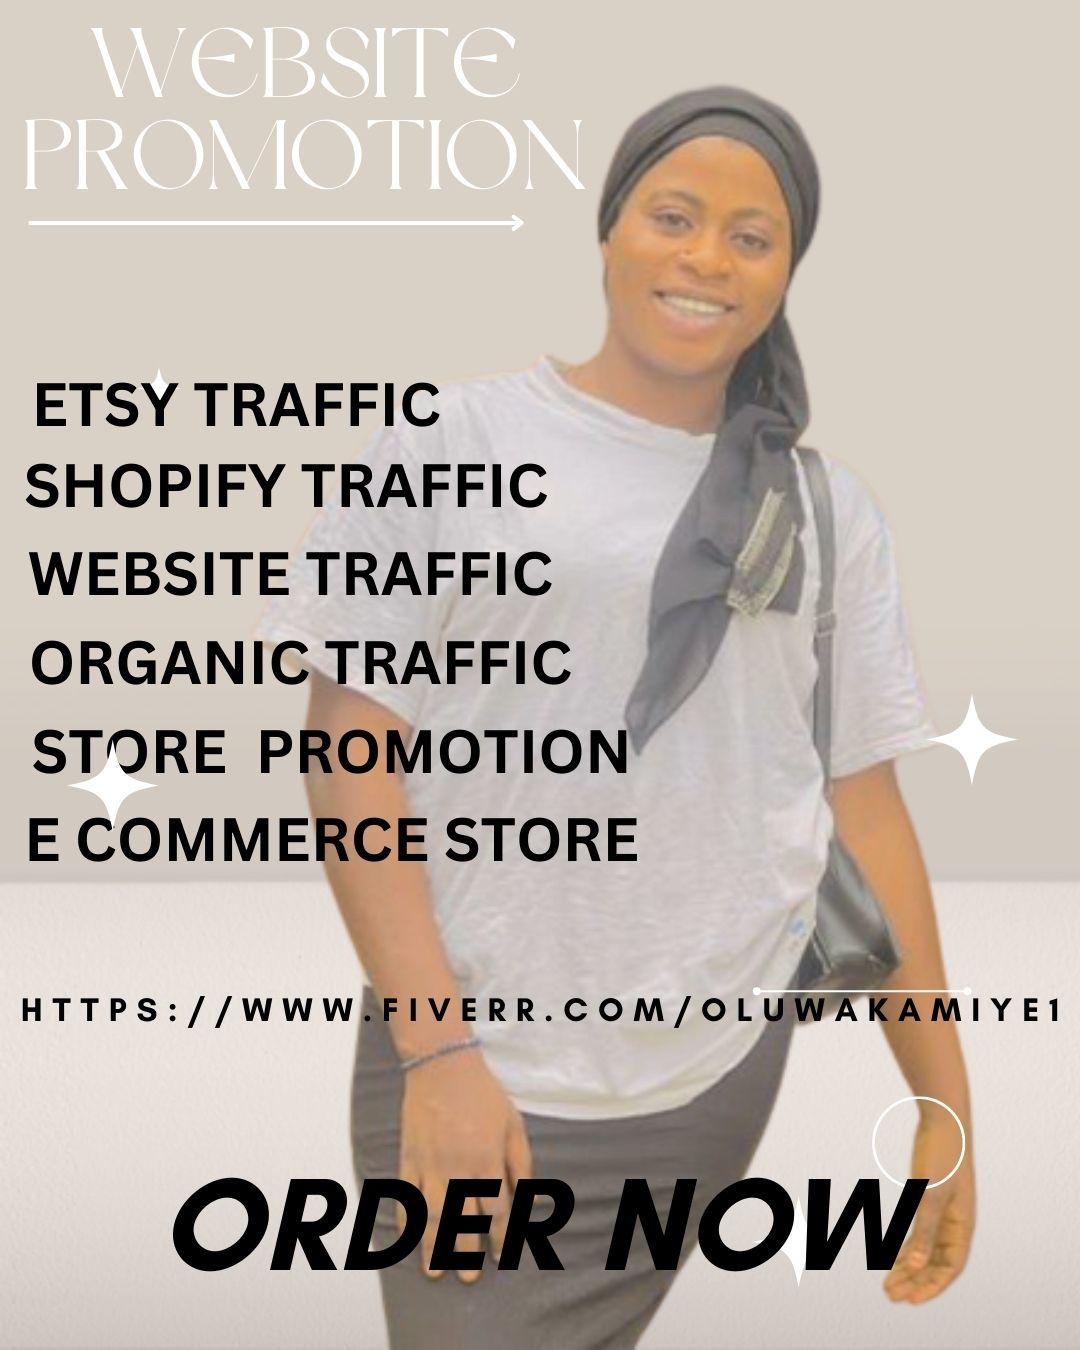 I will boost etsy and shopify website traffic through social media promotion